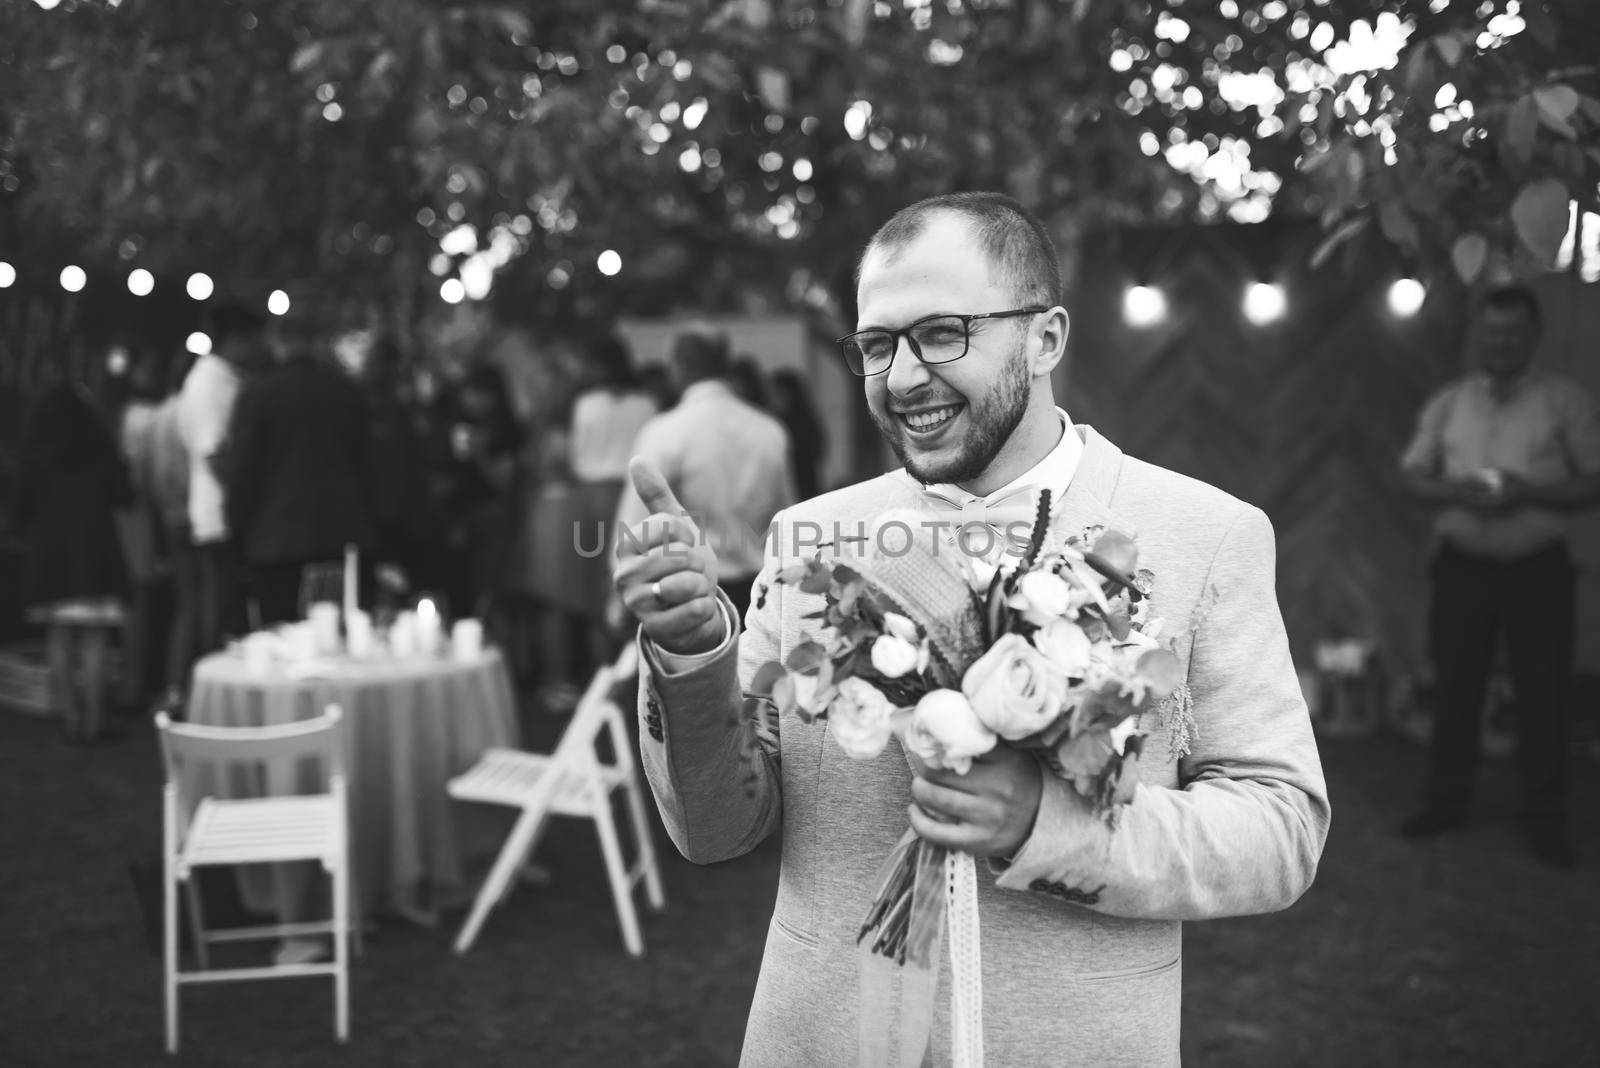 Wedding photo of emotions of a bearded groom with glasses in a gray jacket and rustic style.